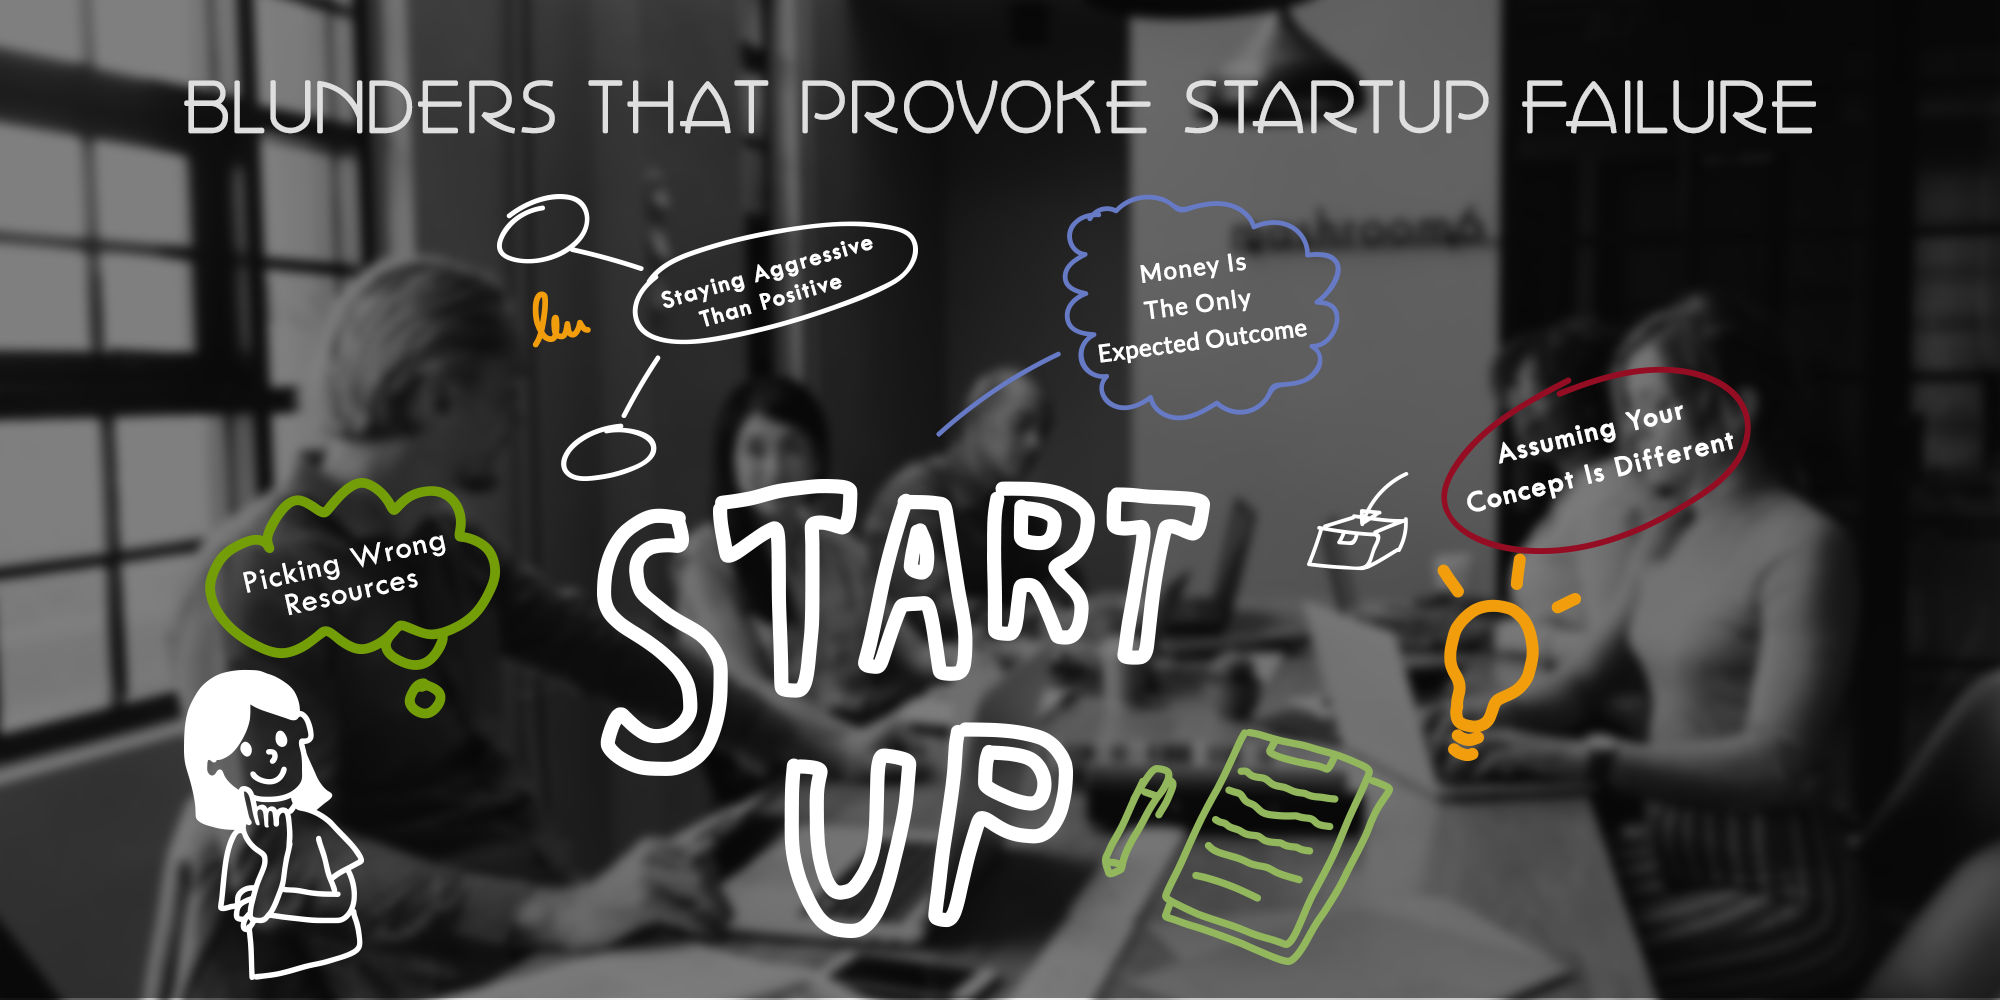 Blunders That Provoke Startup Failure